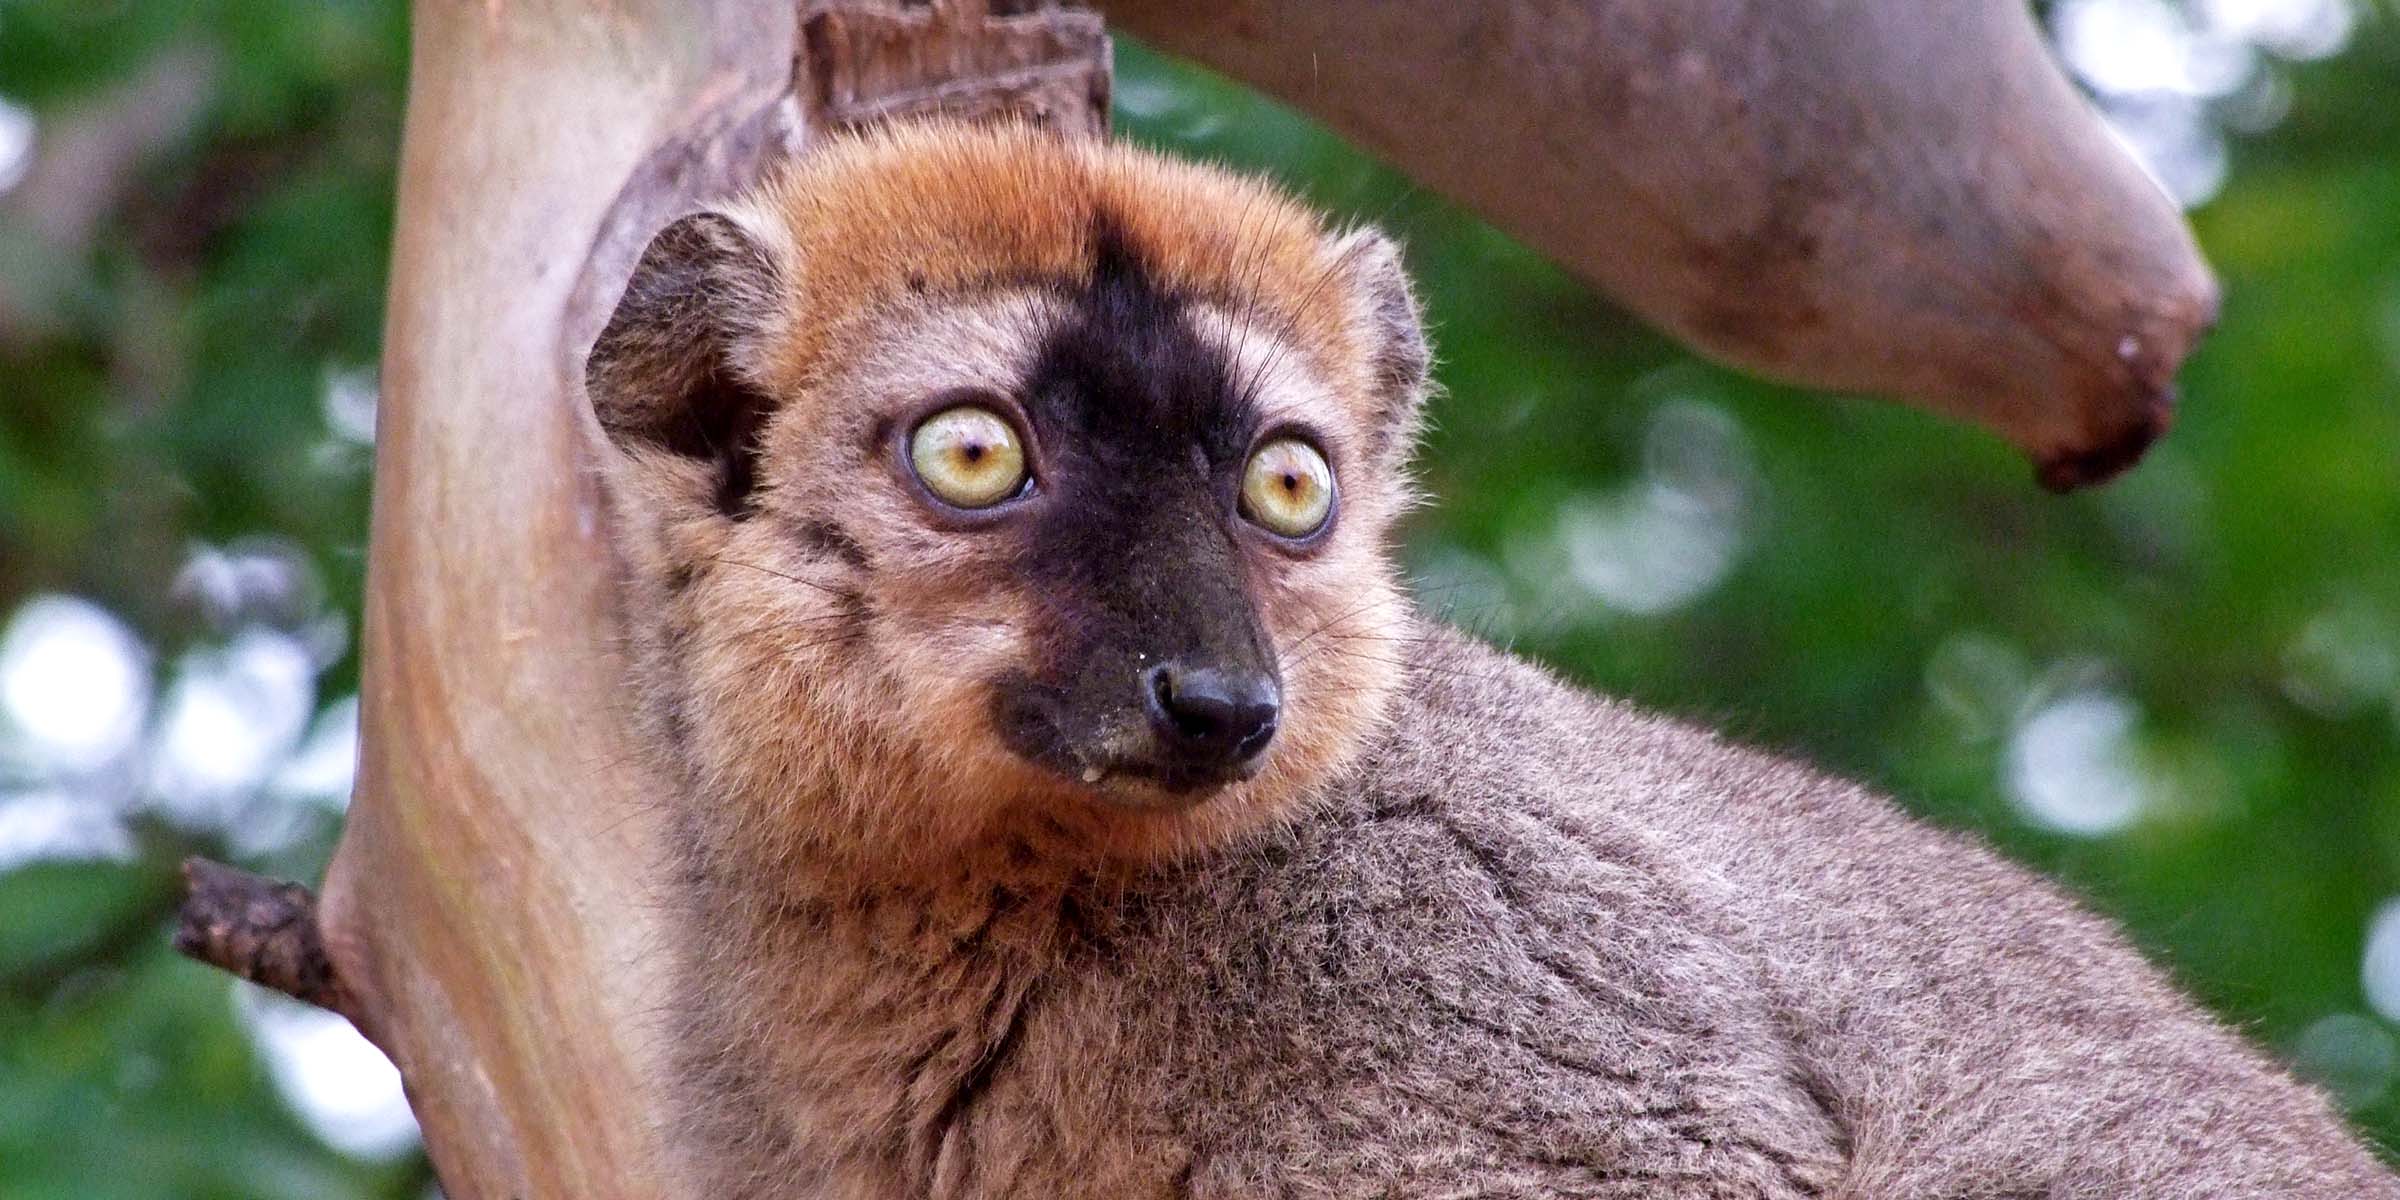 A brown lemur sitting in a tree, staring ahead with wide eyes.